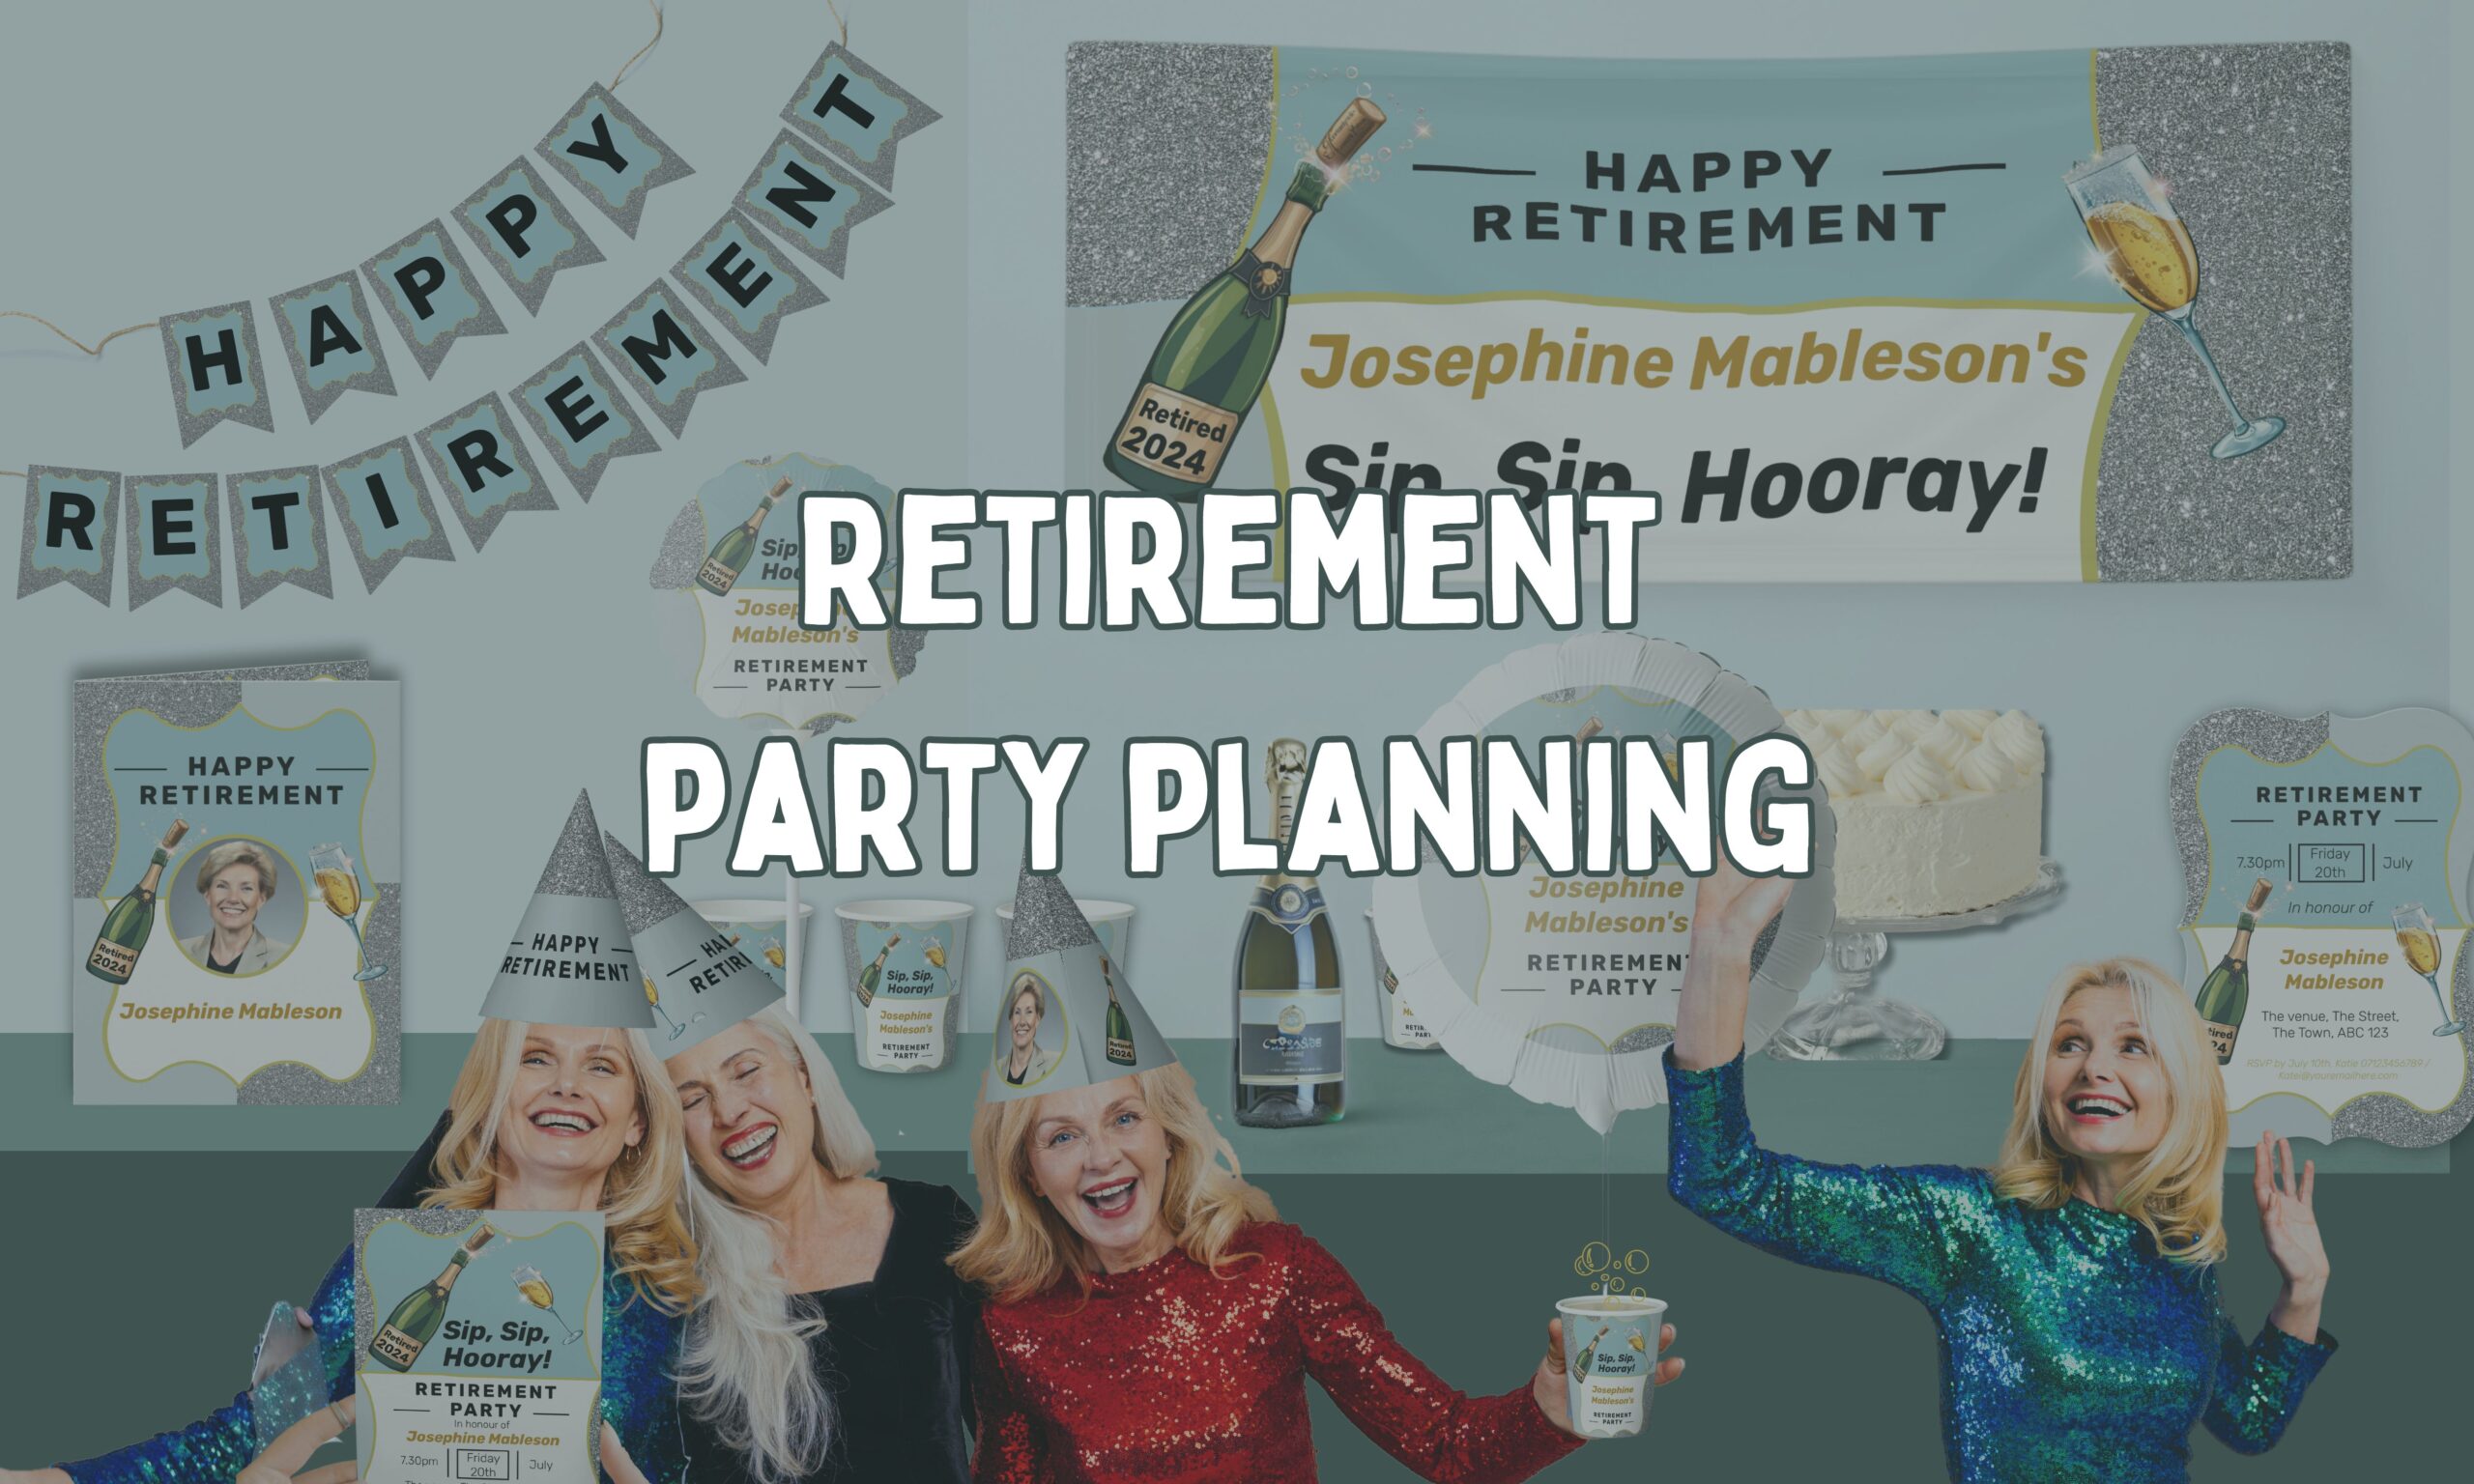 People having fun at a retirement party